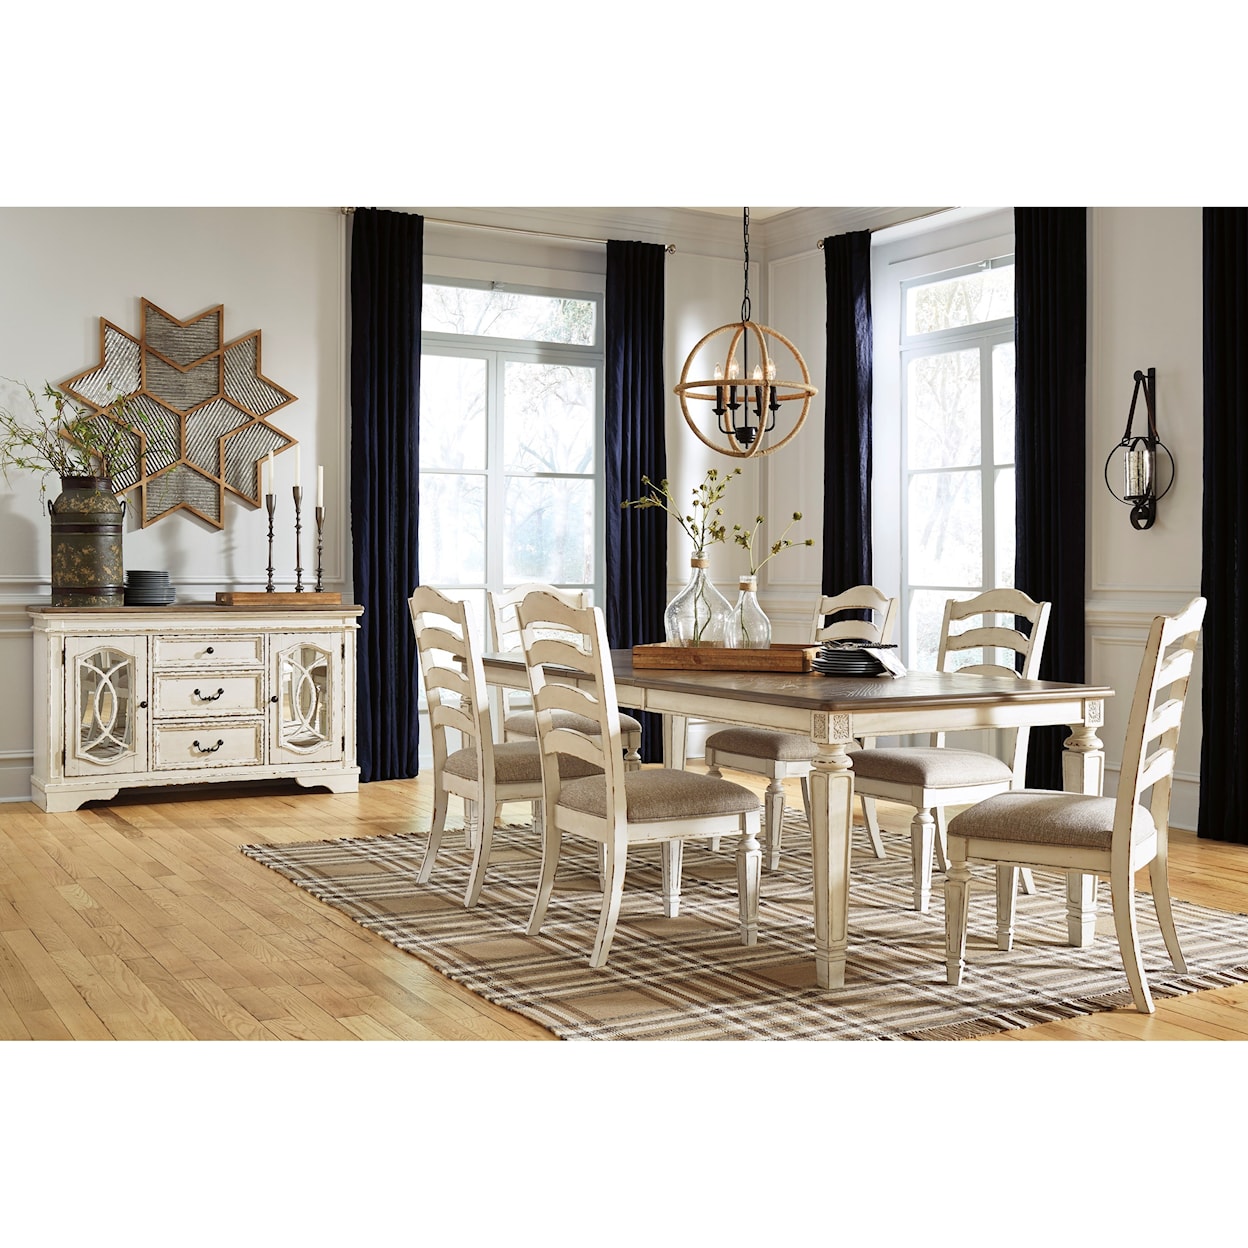 Signature Design by Ashley Furniture Realyn Formal Dining Room Group